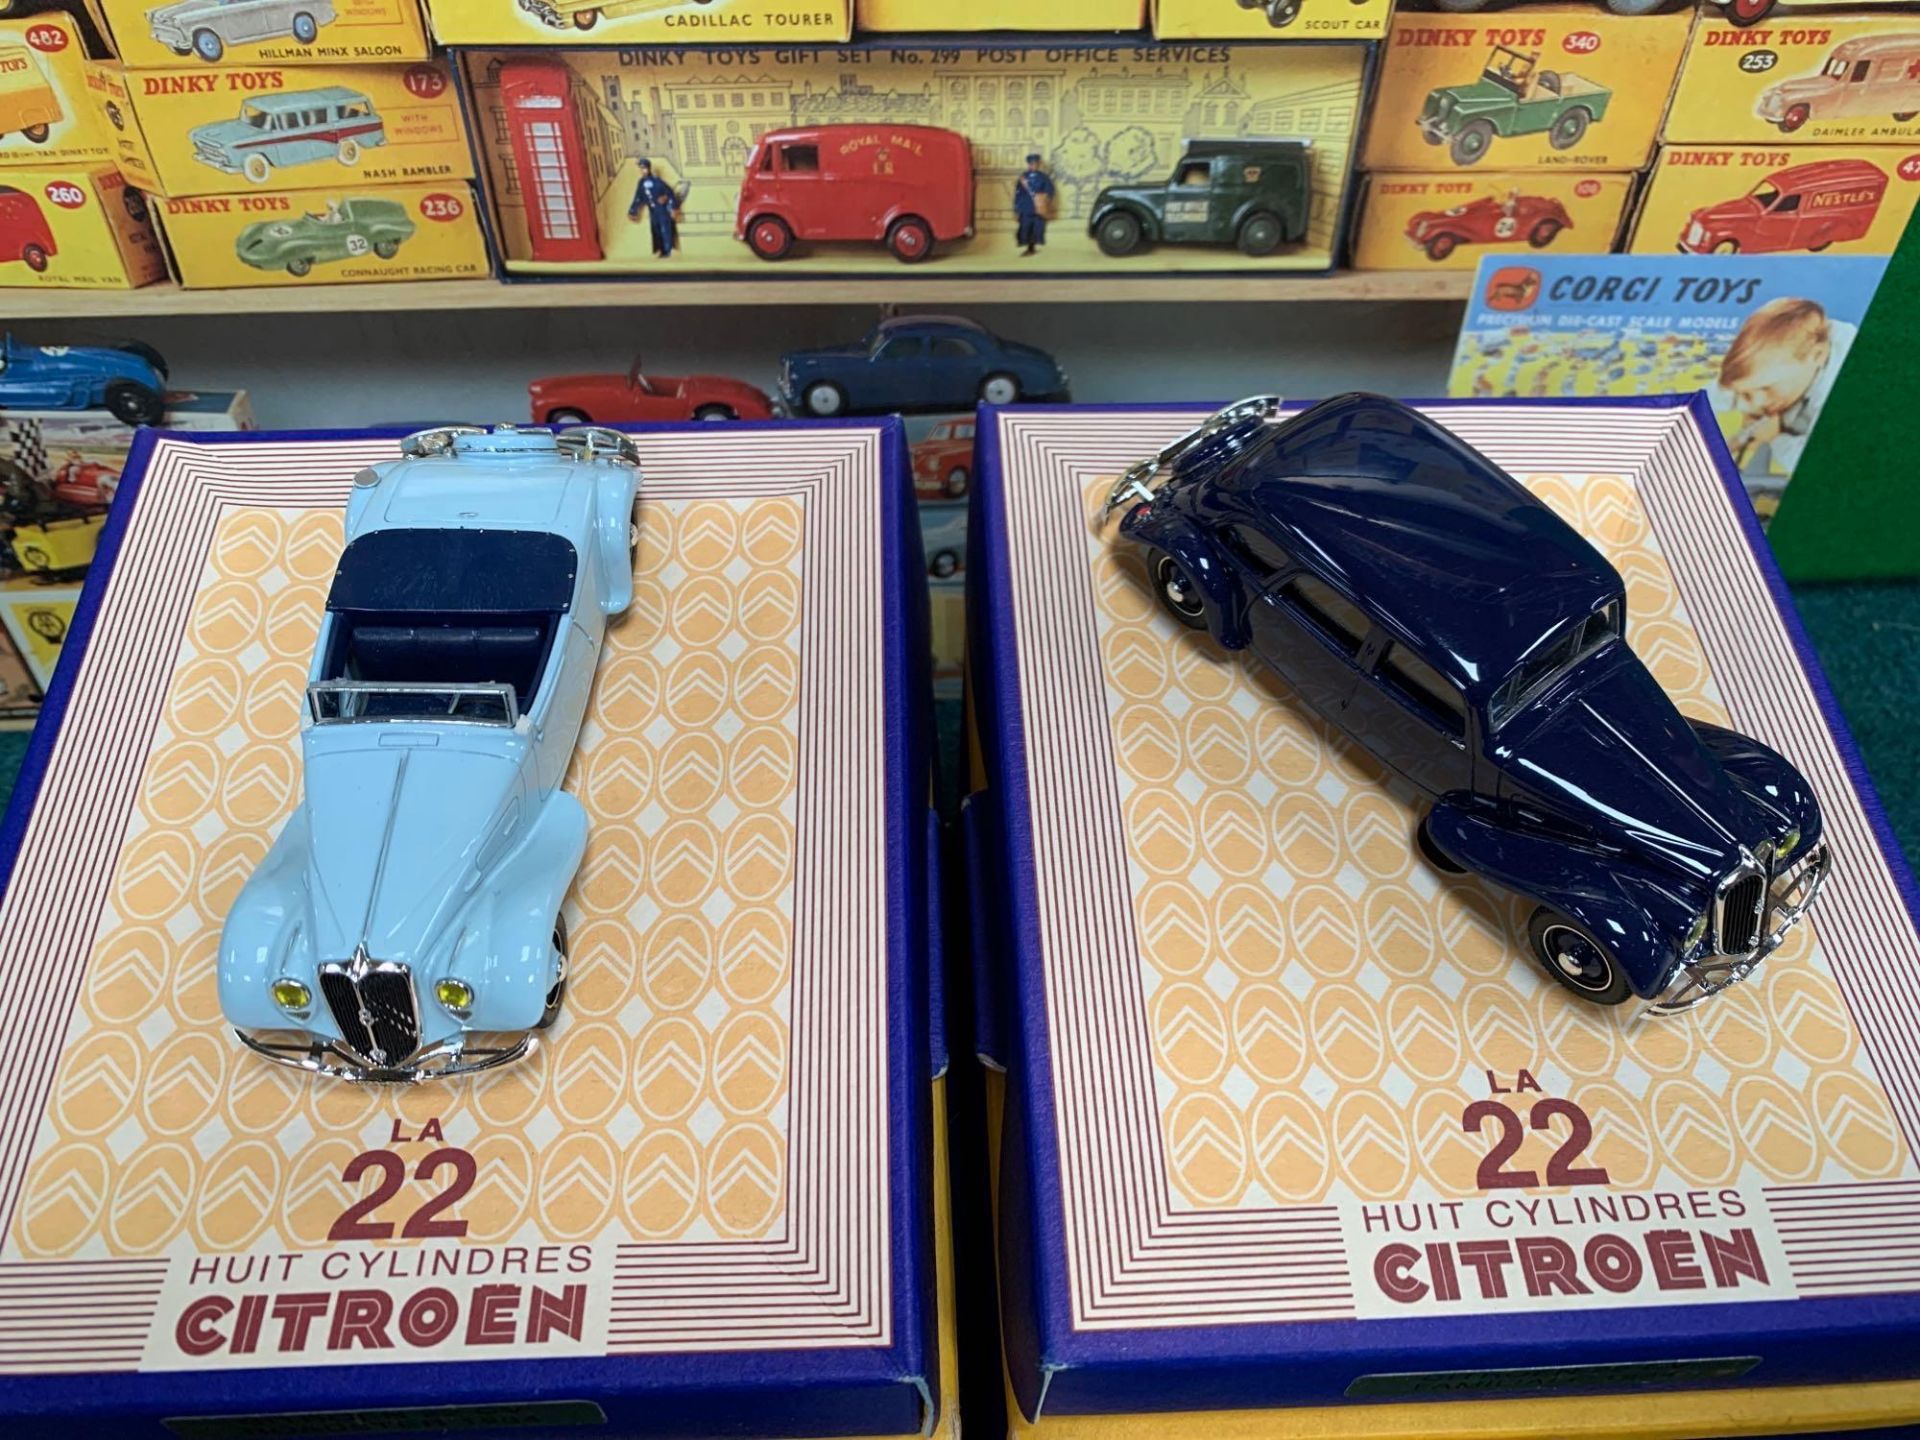 2 X Norev Diecasts. Citroen - Traction Avant 22CV Familiare 1934 Limousine In Navy Blue And - Image 7 of 9